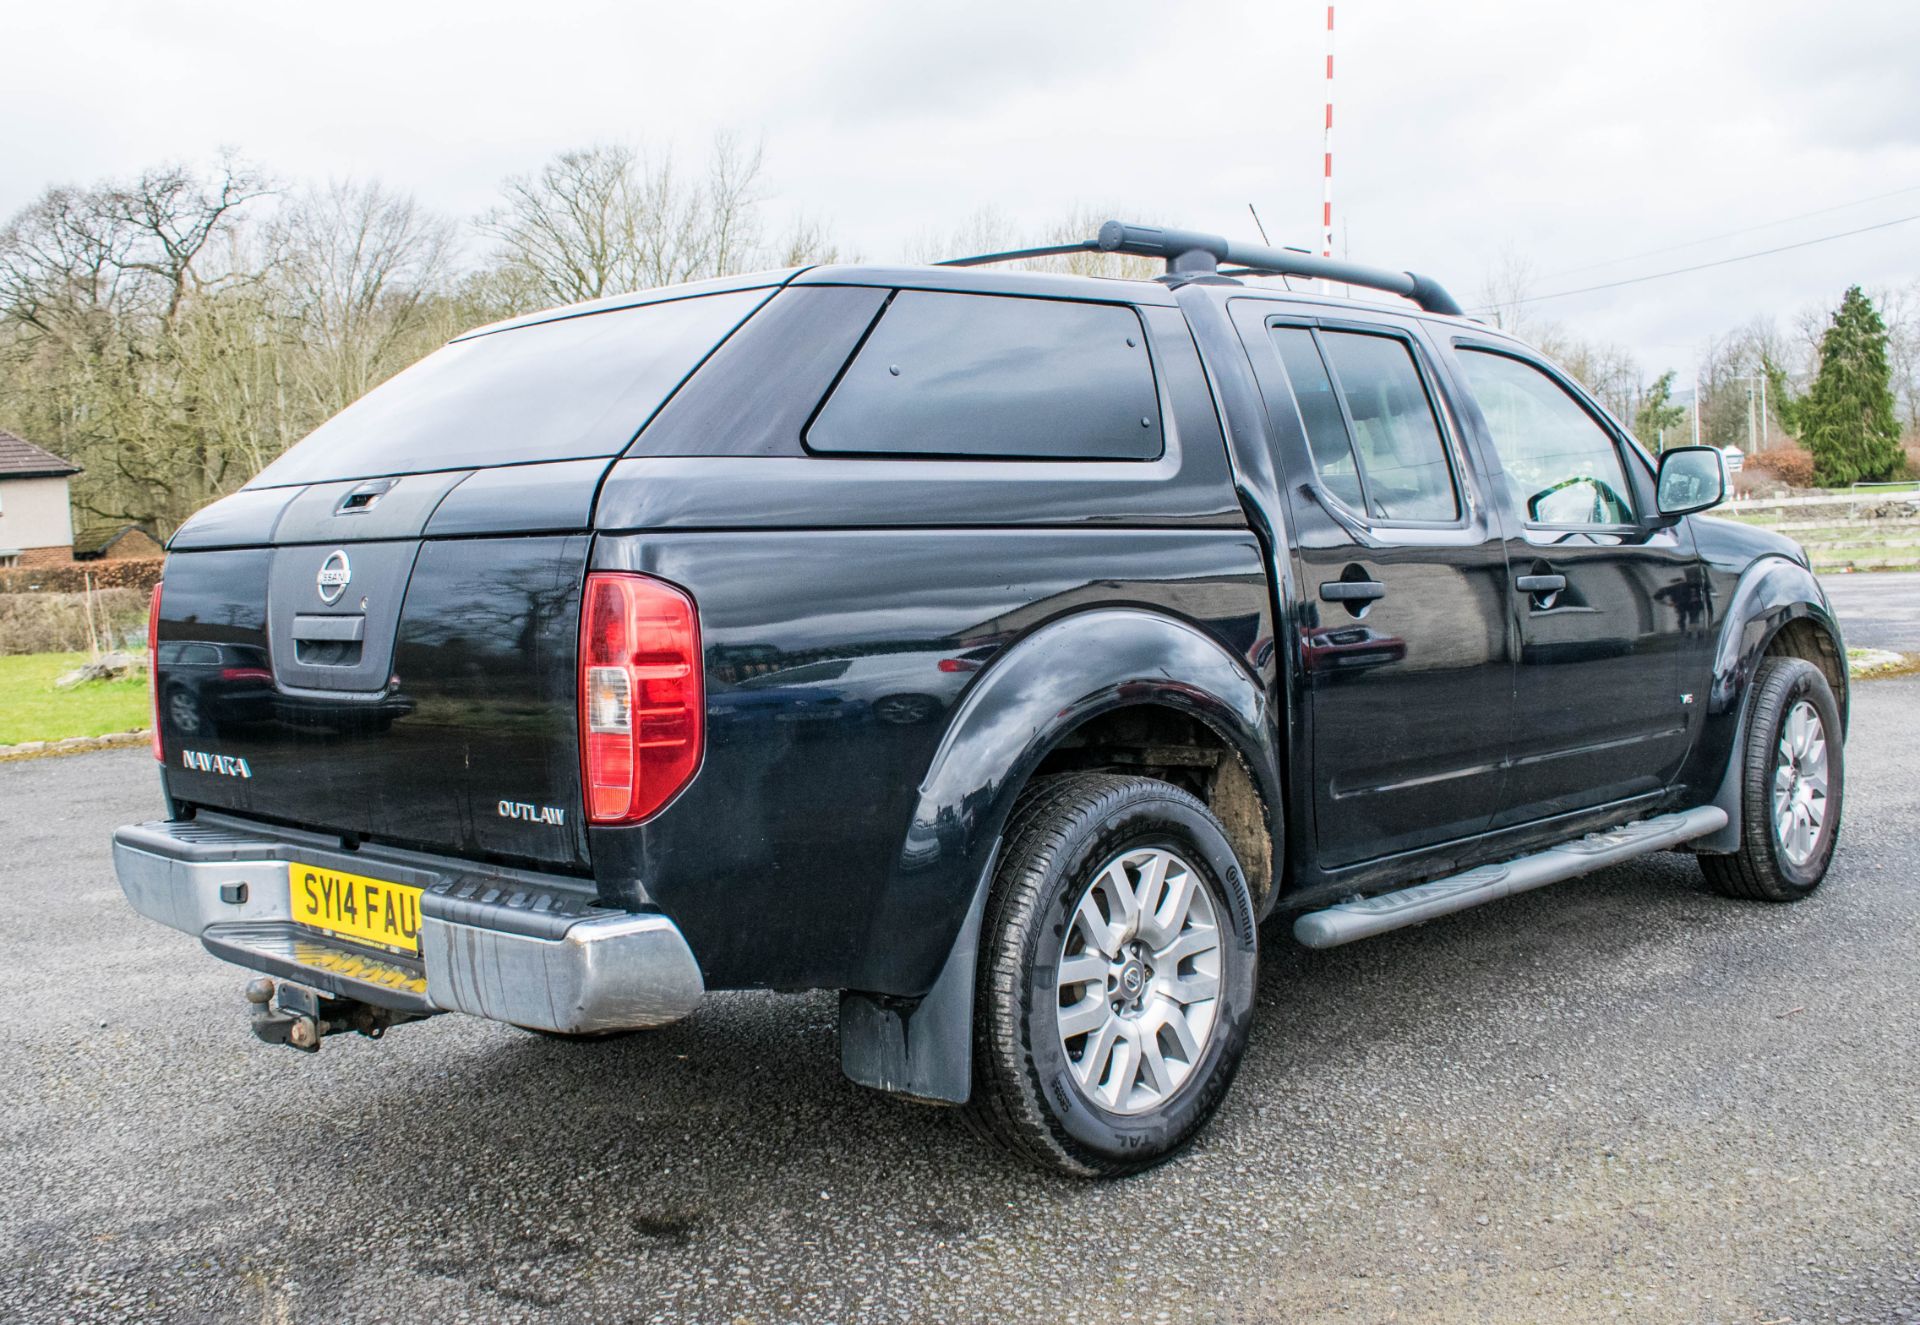 Nissan Navara Outlaw DCi Auto 3.0 V6 diesel 4 wheel drive pick up Registration Number: SY14 FAU Date - Image 3 of 20